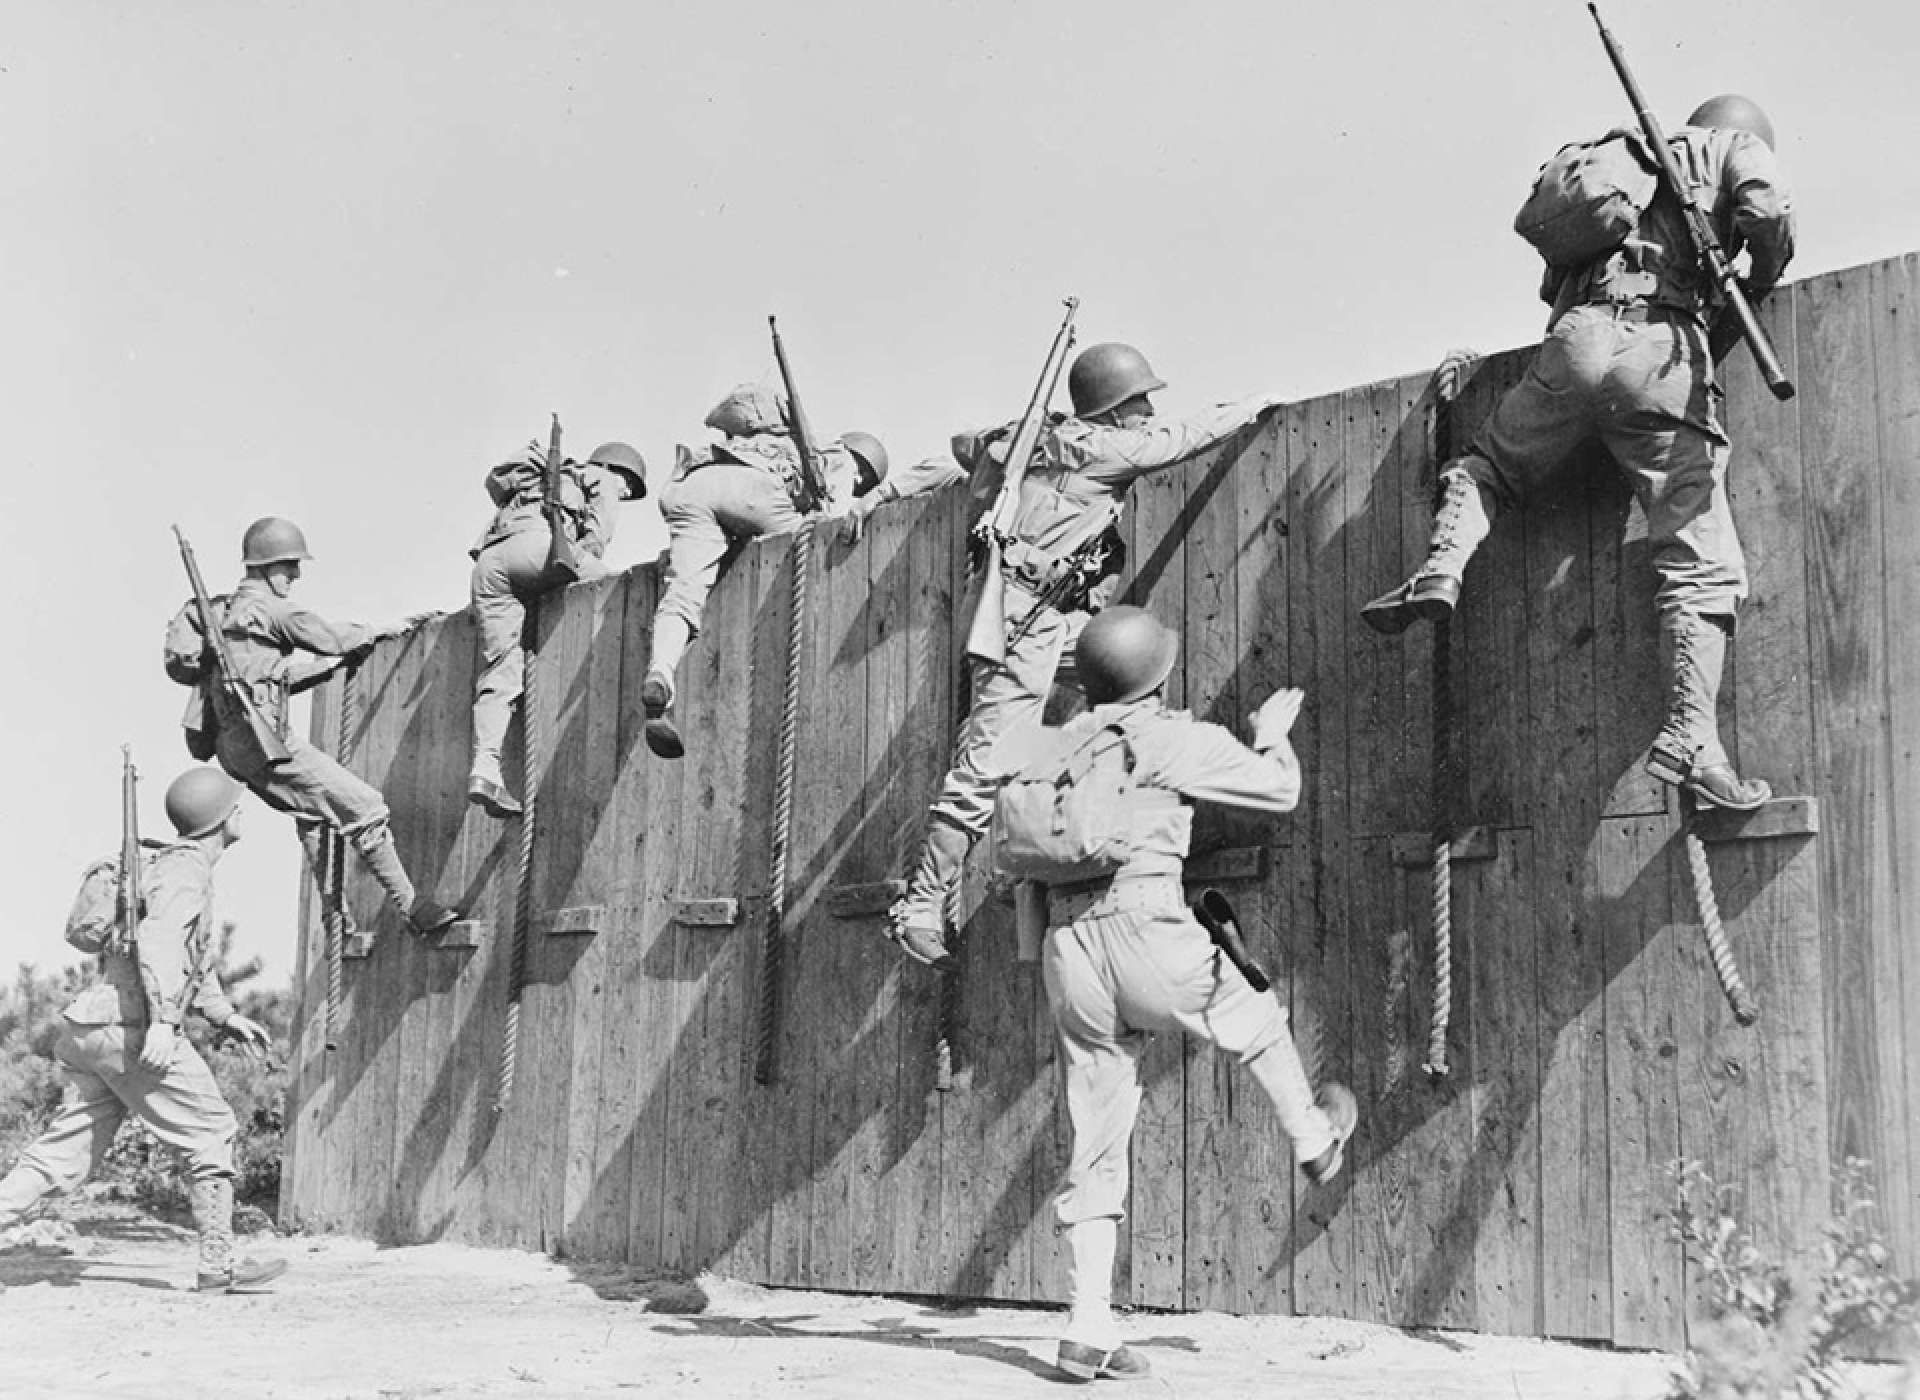 Soldiers tackle part of an obstacle course at Camp Edwards, Massachusetts, 1942.